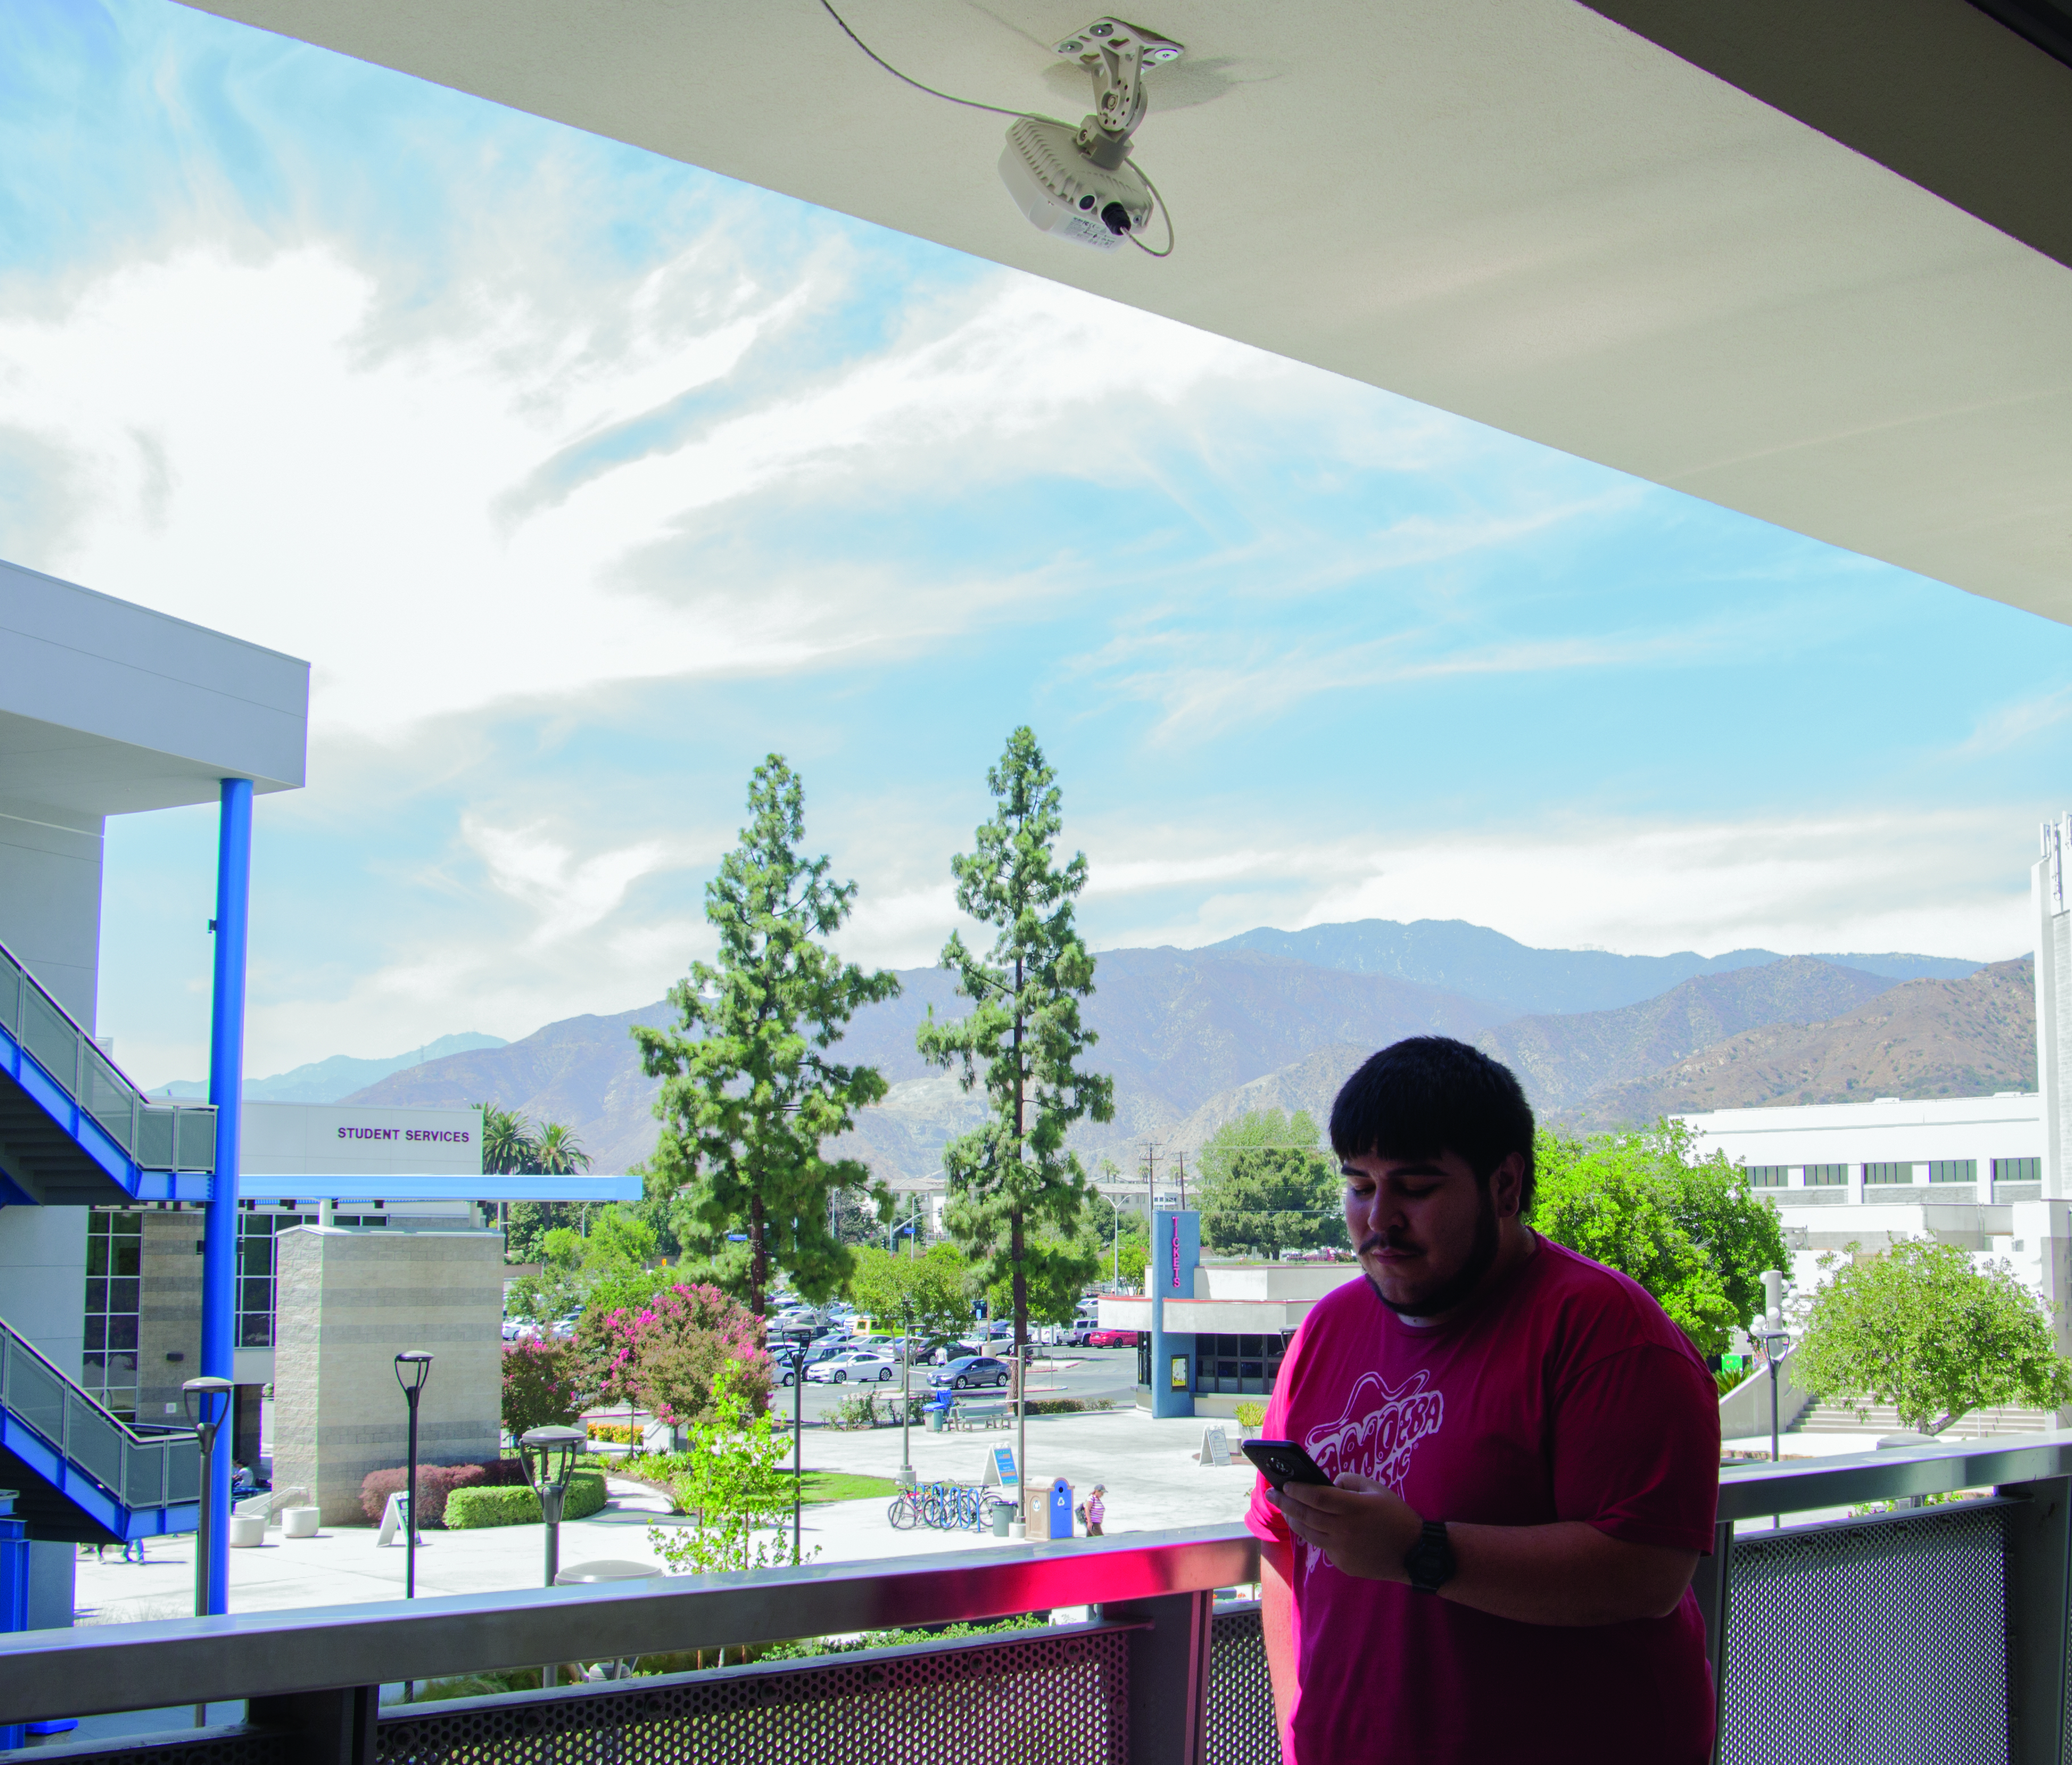 College wireless connection is heating up: Outdoor internet hotspots available on most of campus